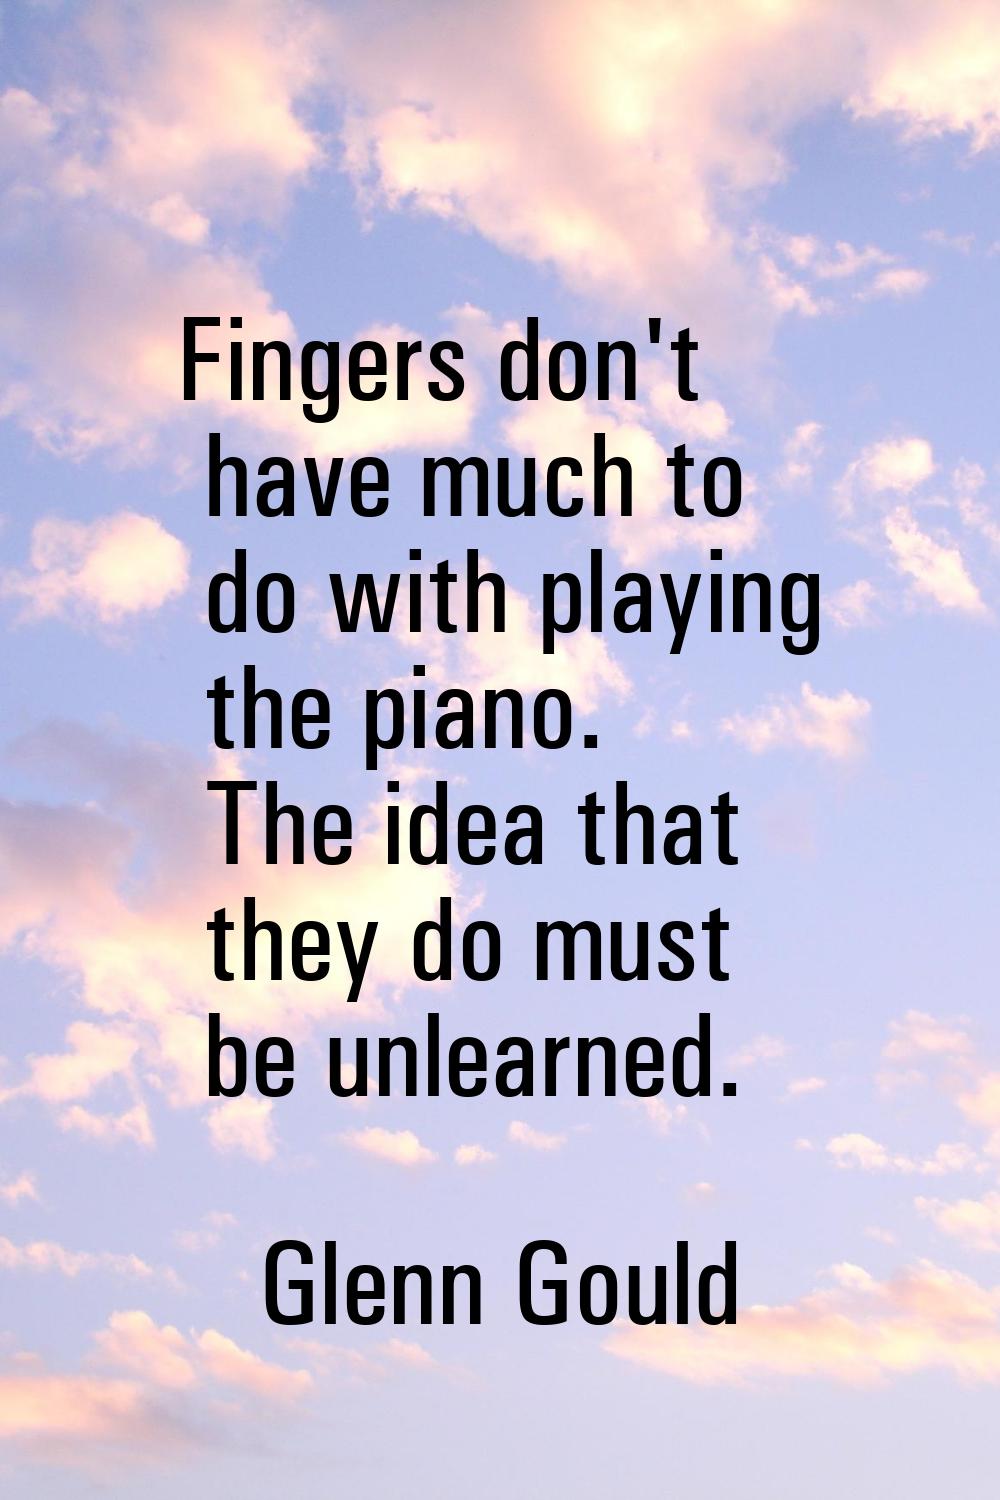 Fingers don't have much to do with playing the piano. The idea that they do must be unlearned.